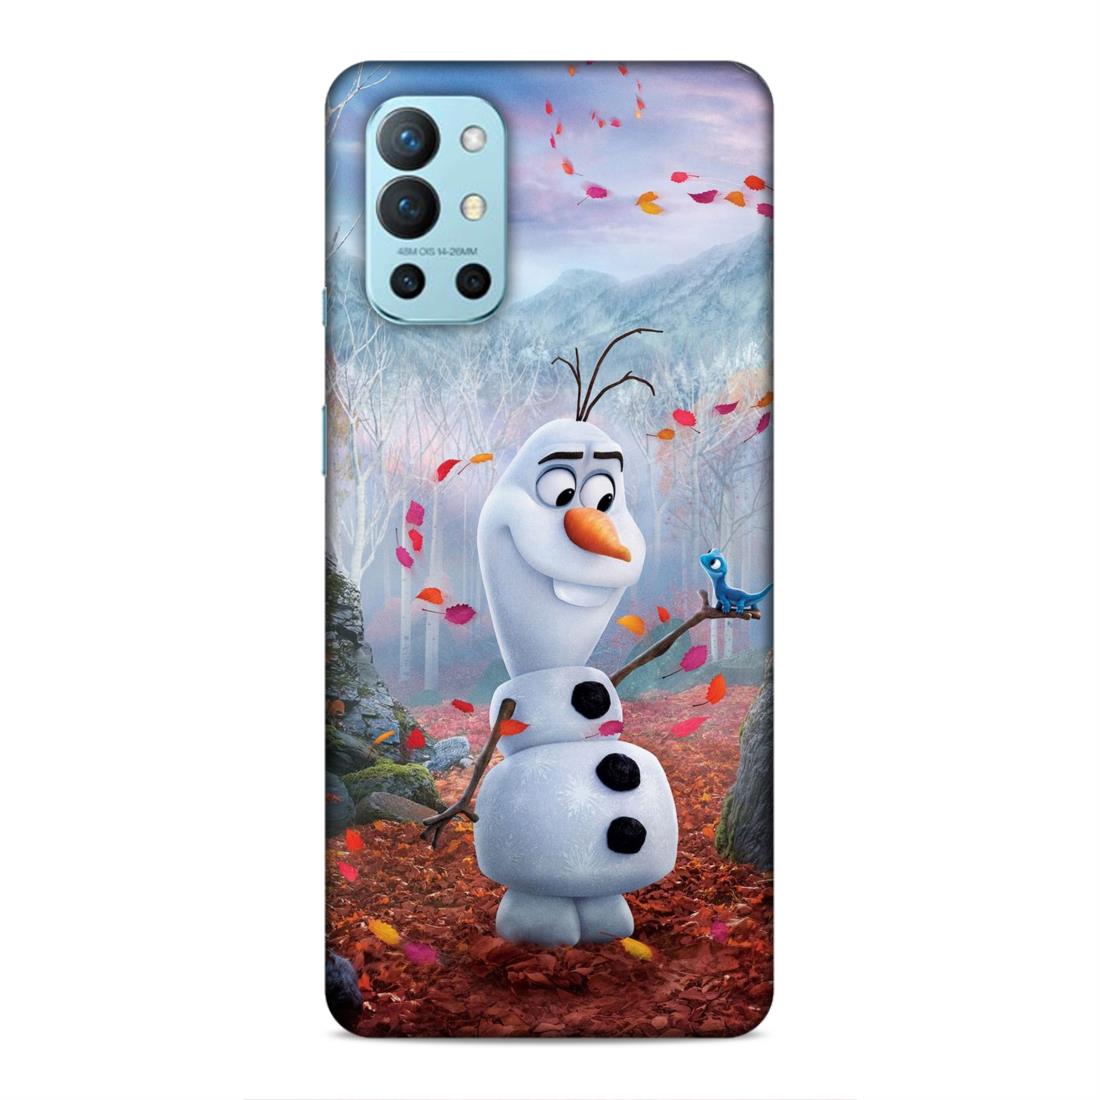 Olaf Hard Back Case For OnePlus 8T / 9R